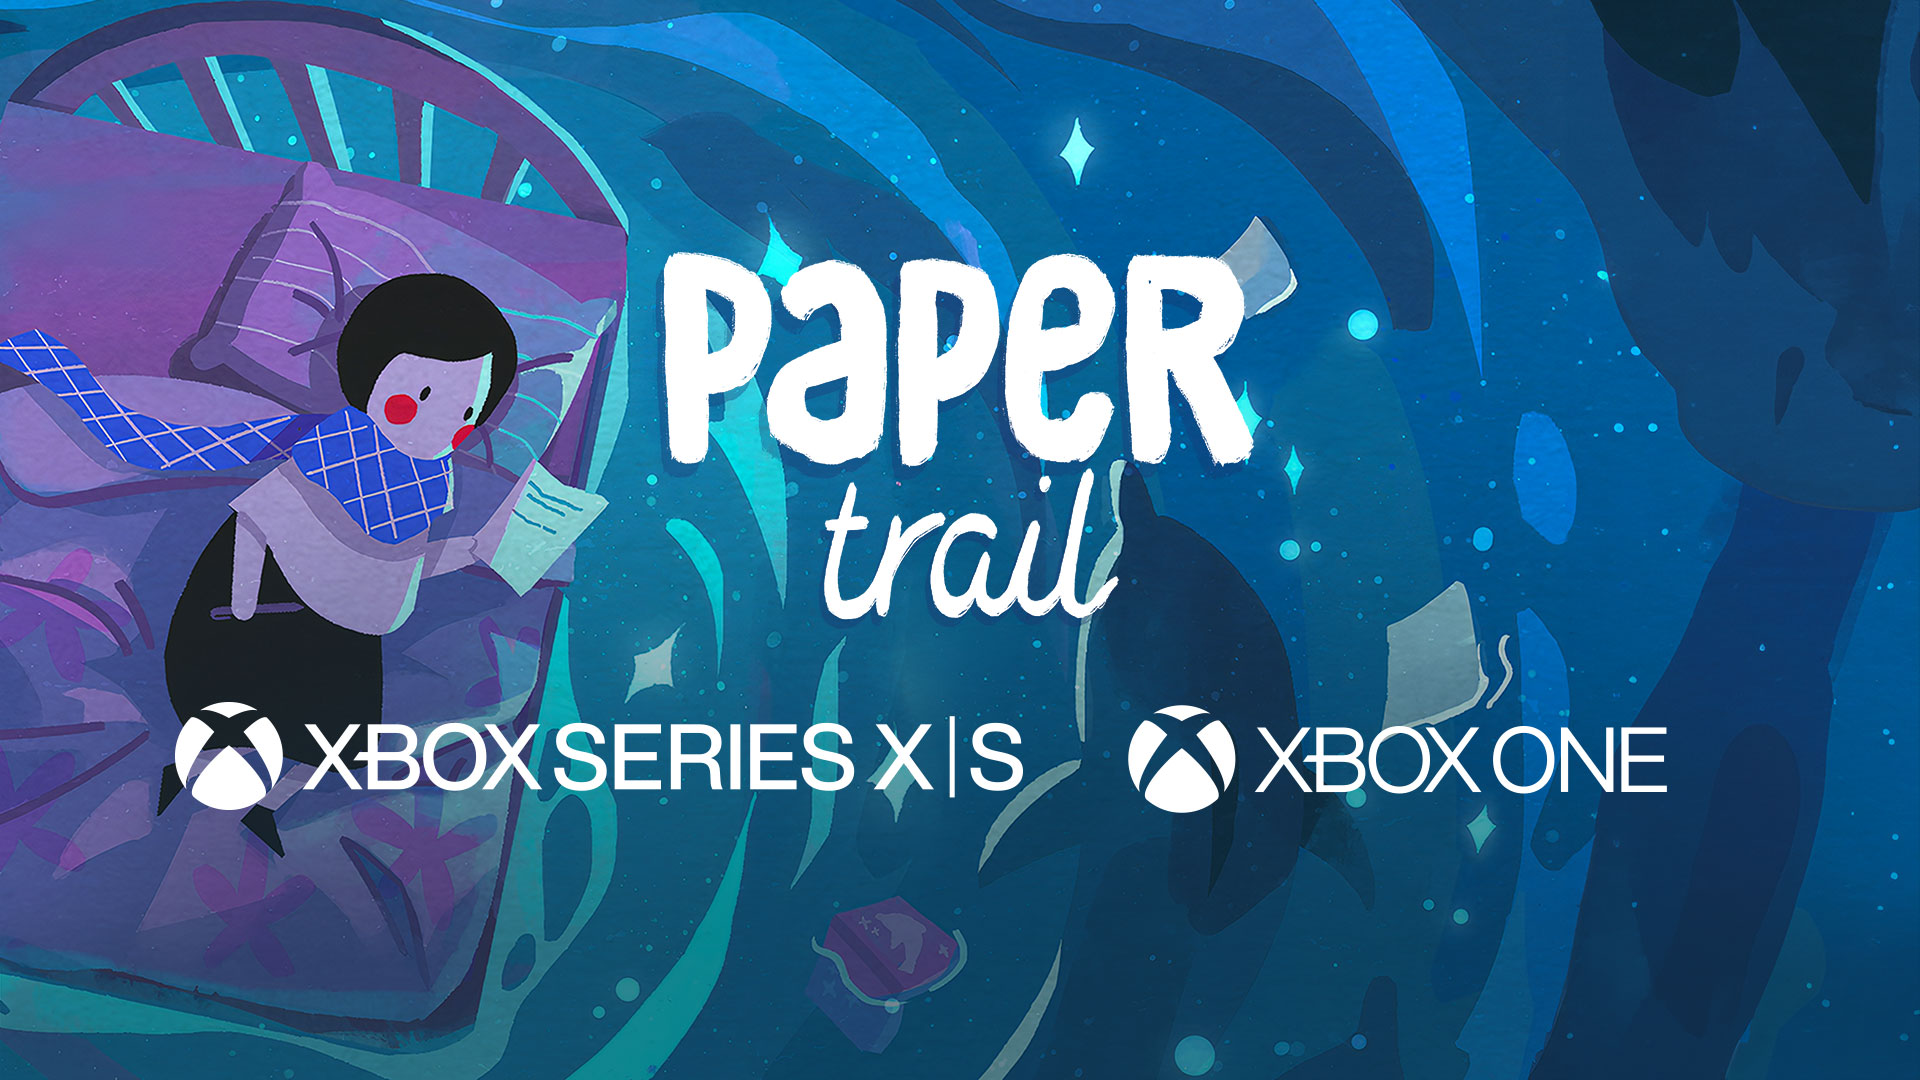 Demo the Award-Winning Paper Trail Now, Ahead of the May 21 Xbox Launch